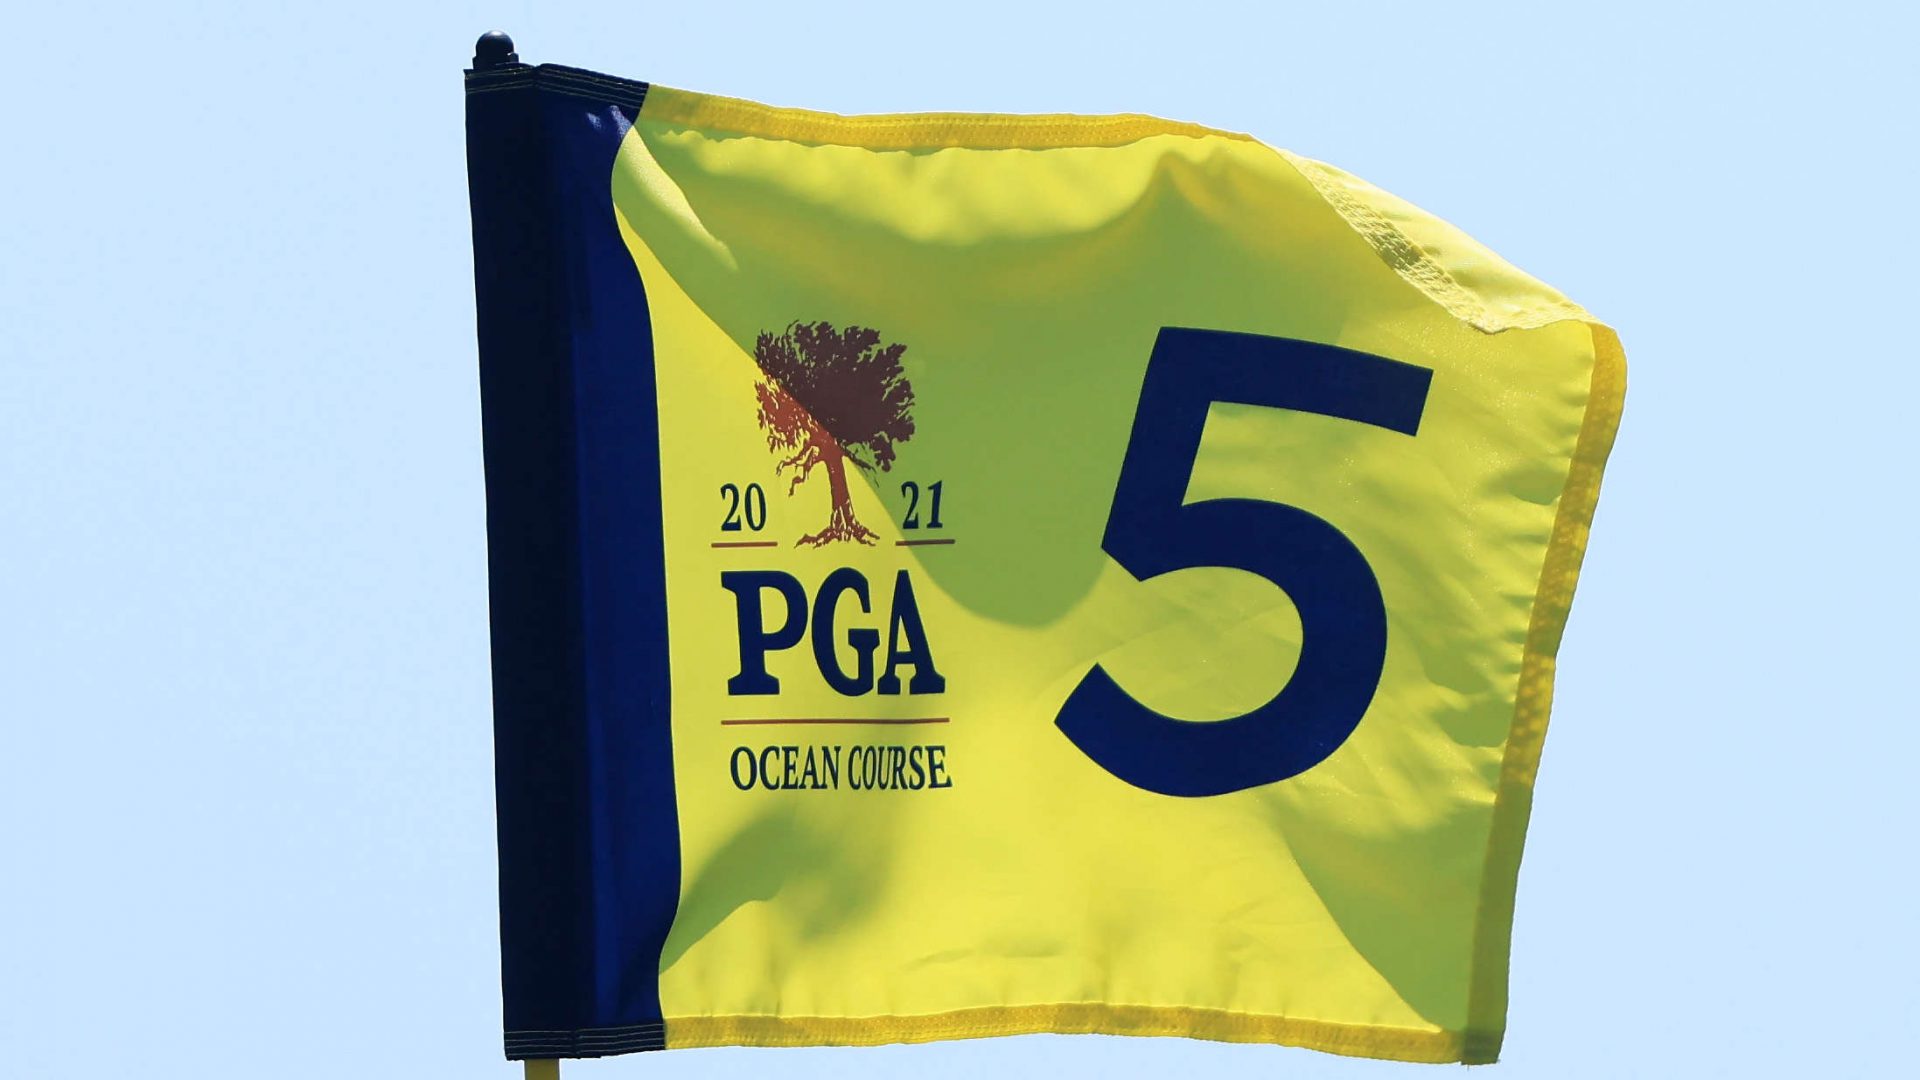 KIAWAH ISLAND, SOUTH CAROLINA - MAY 17: A pin flag is displayed on the fifth green during a practice round prior to the 2021 PGA Championship at Kiawah Island Resort's Ocean Course on May 17, 2021 in Kiawah Island, South Carolina. (Photo by Sam Greenwood/Getty Images)